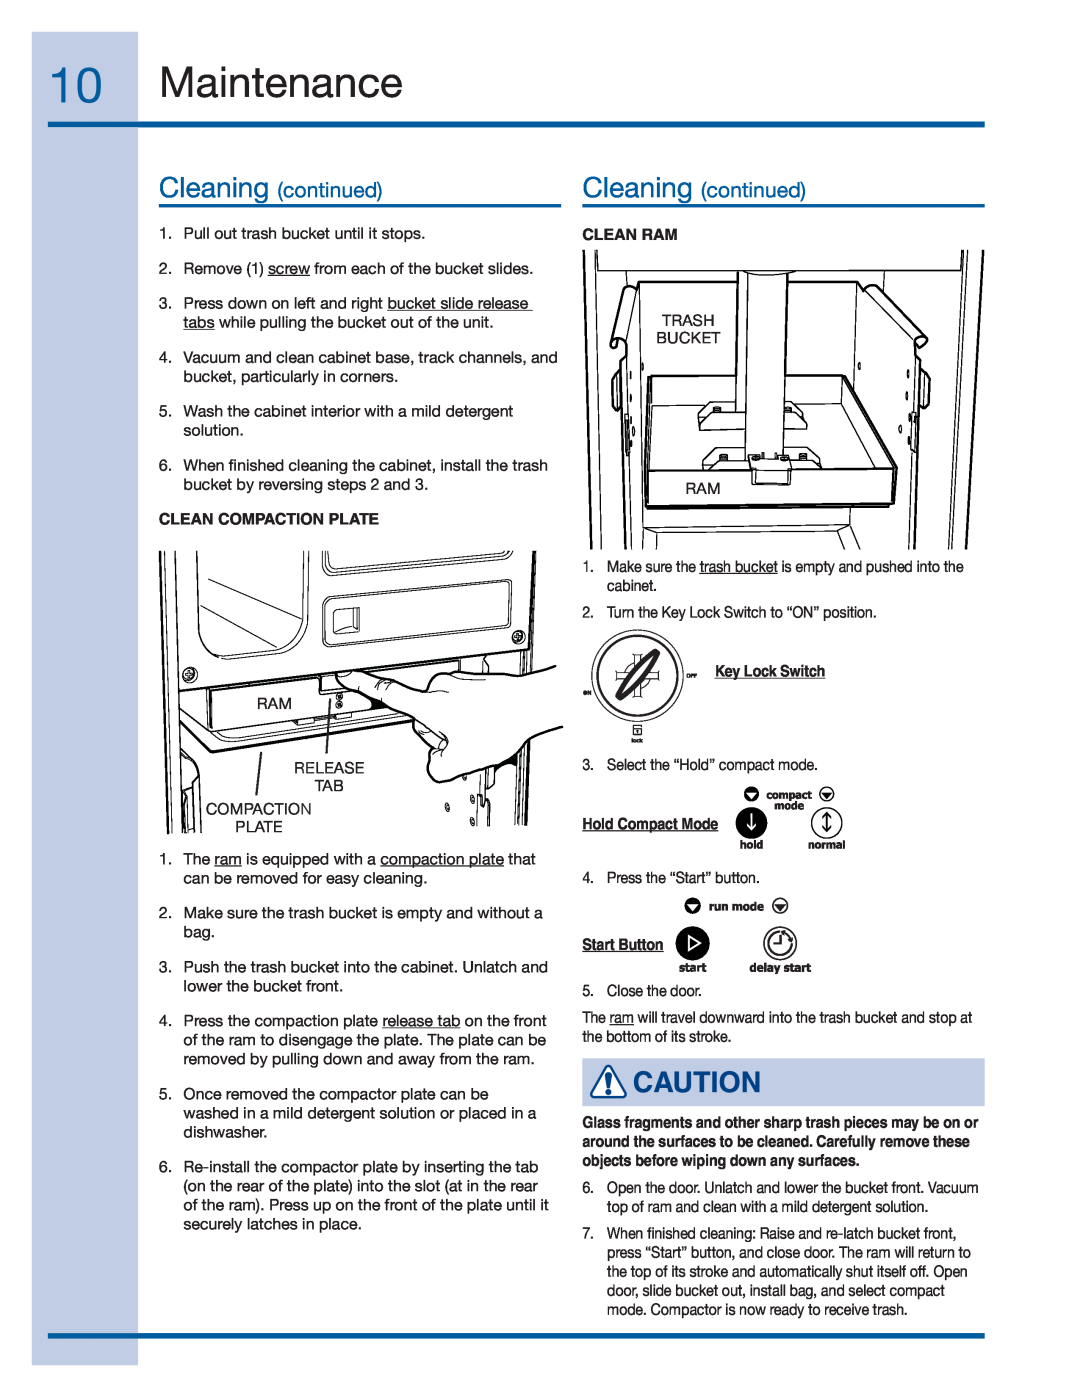 Electrolux 99526808A, E15TC75HPS manual Maintenance, Cleaning continued 